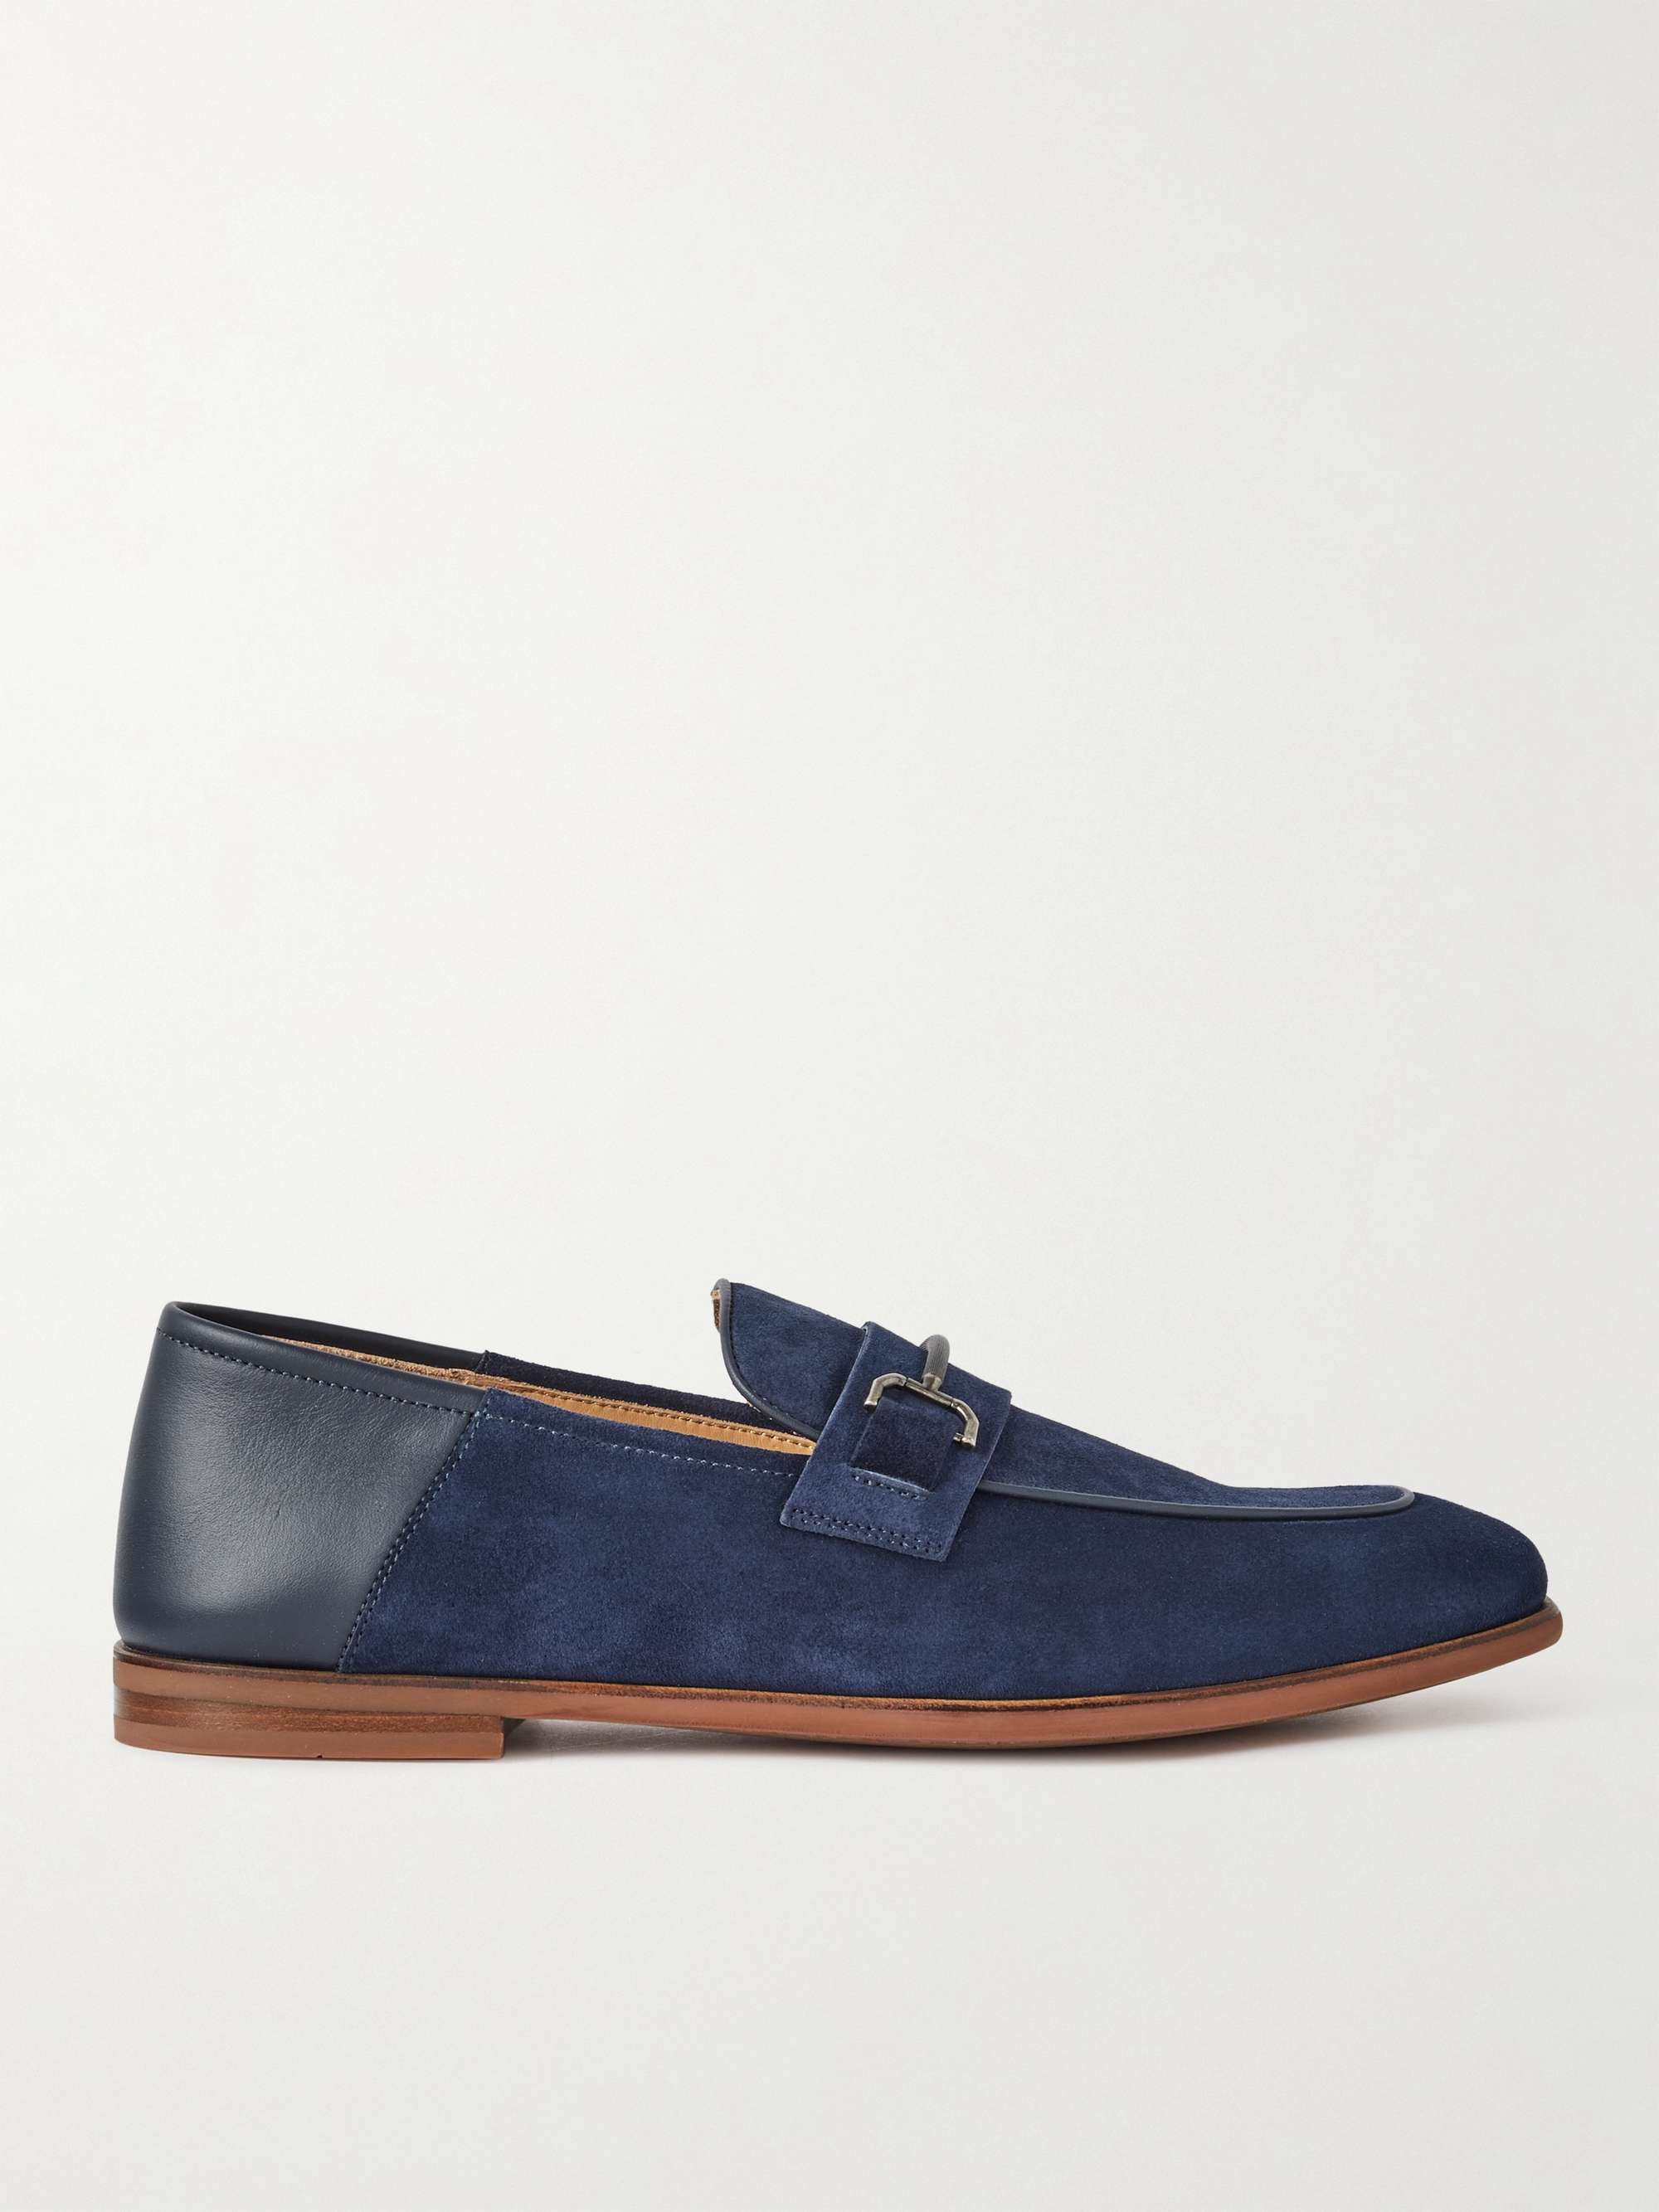 DUNHILL Chiltern Suede and Leather Loafers